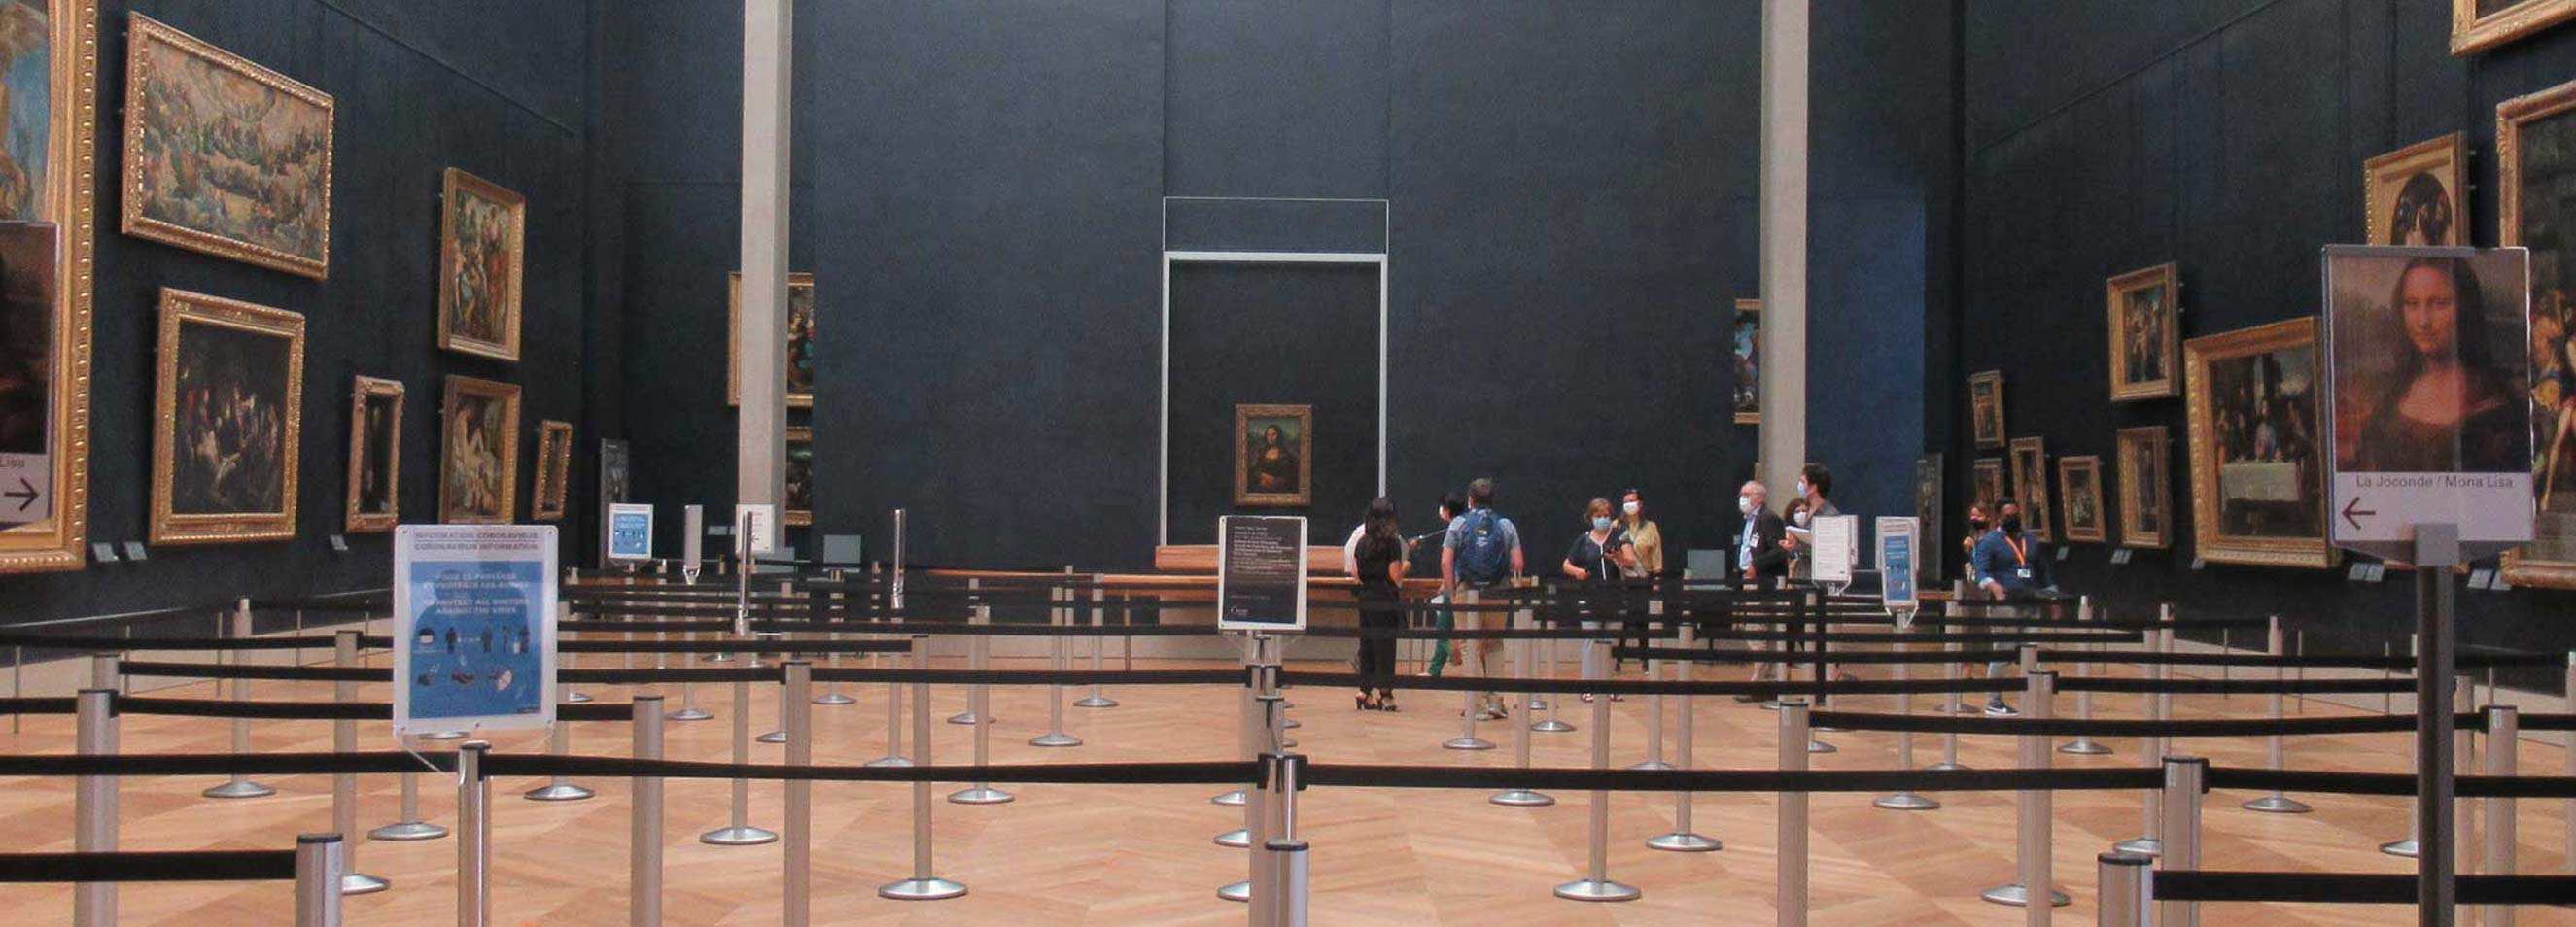 Exhibition room in the Louvre Museum with people guidance system